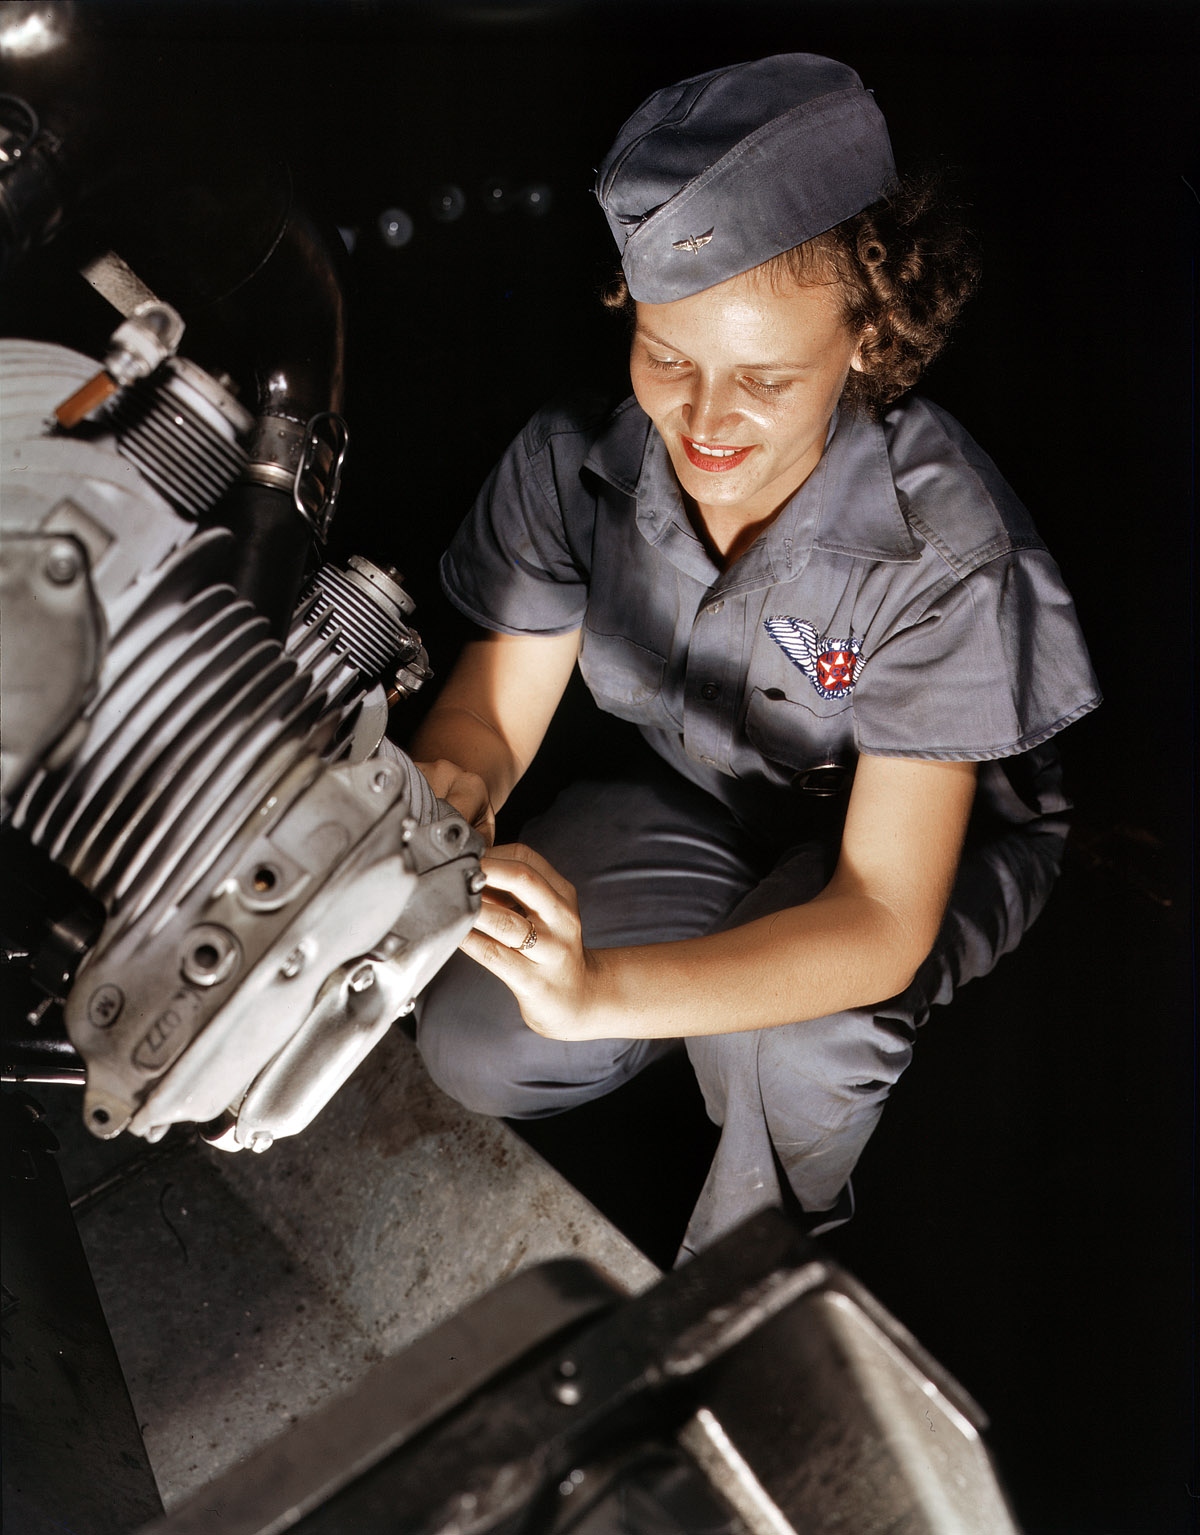 August 1942. Mechanic Mary Josephine Farley works on a Wright Whirlwind motor in the Corpus Christi, Texas, Naval Air Base assembly and repairs shop. View full size. 4x5 Kodachrome transparency by Howard R. Hollem.